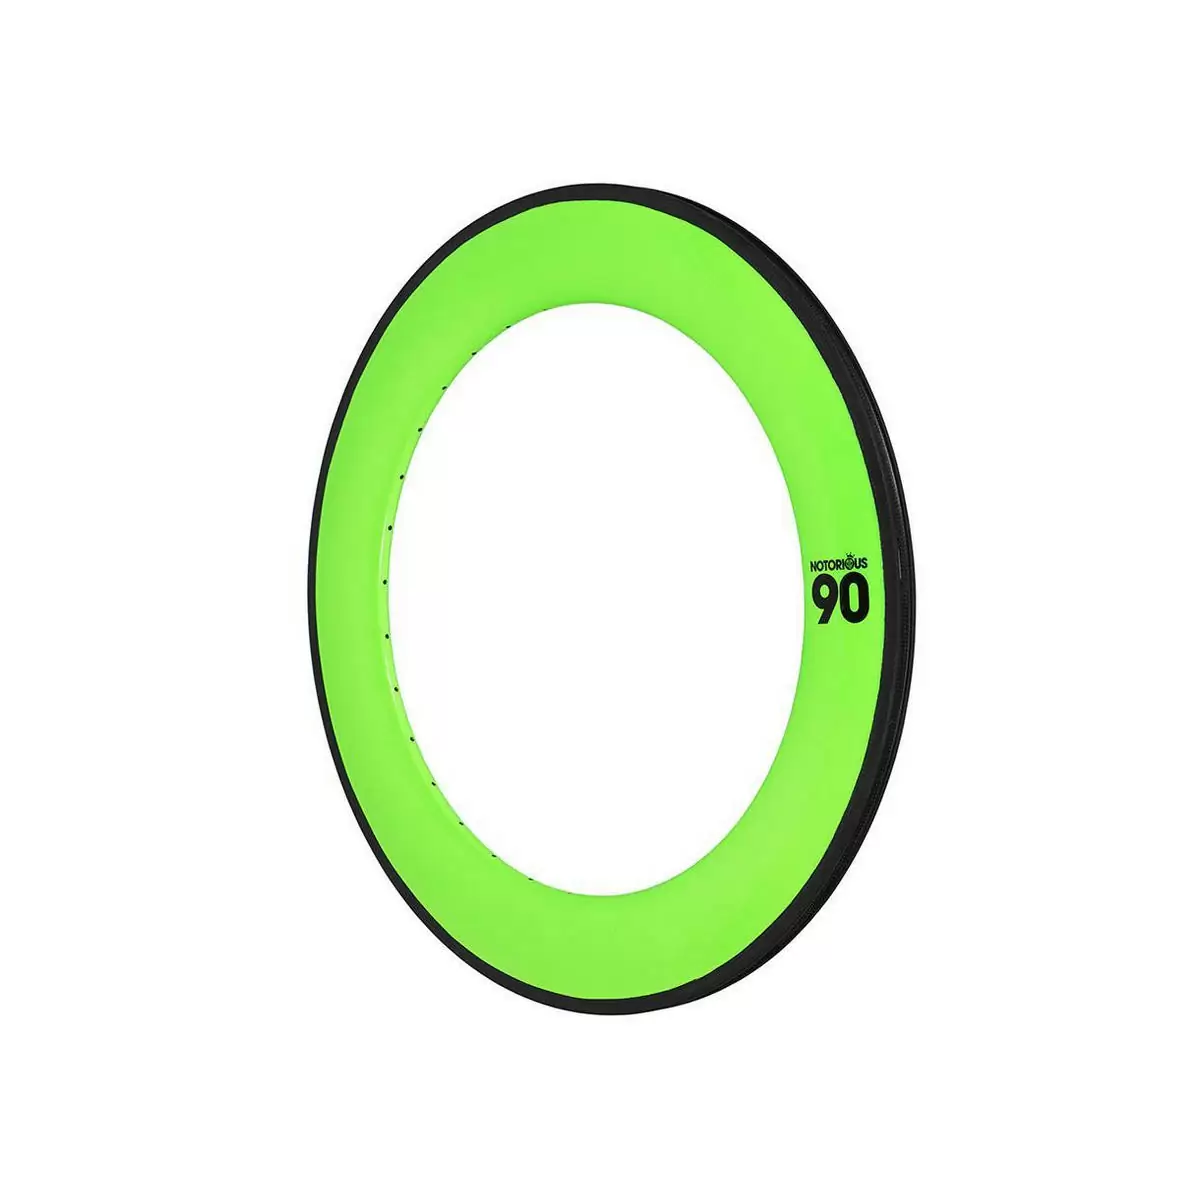 rim notorious 90 700c carbon 32h msw fluo green - image